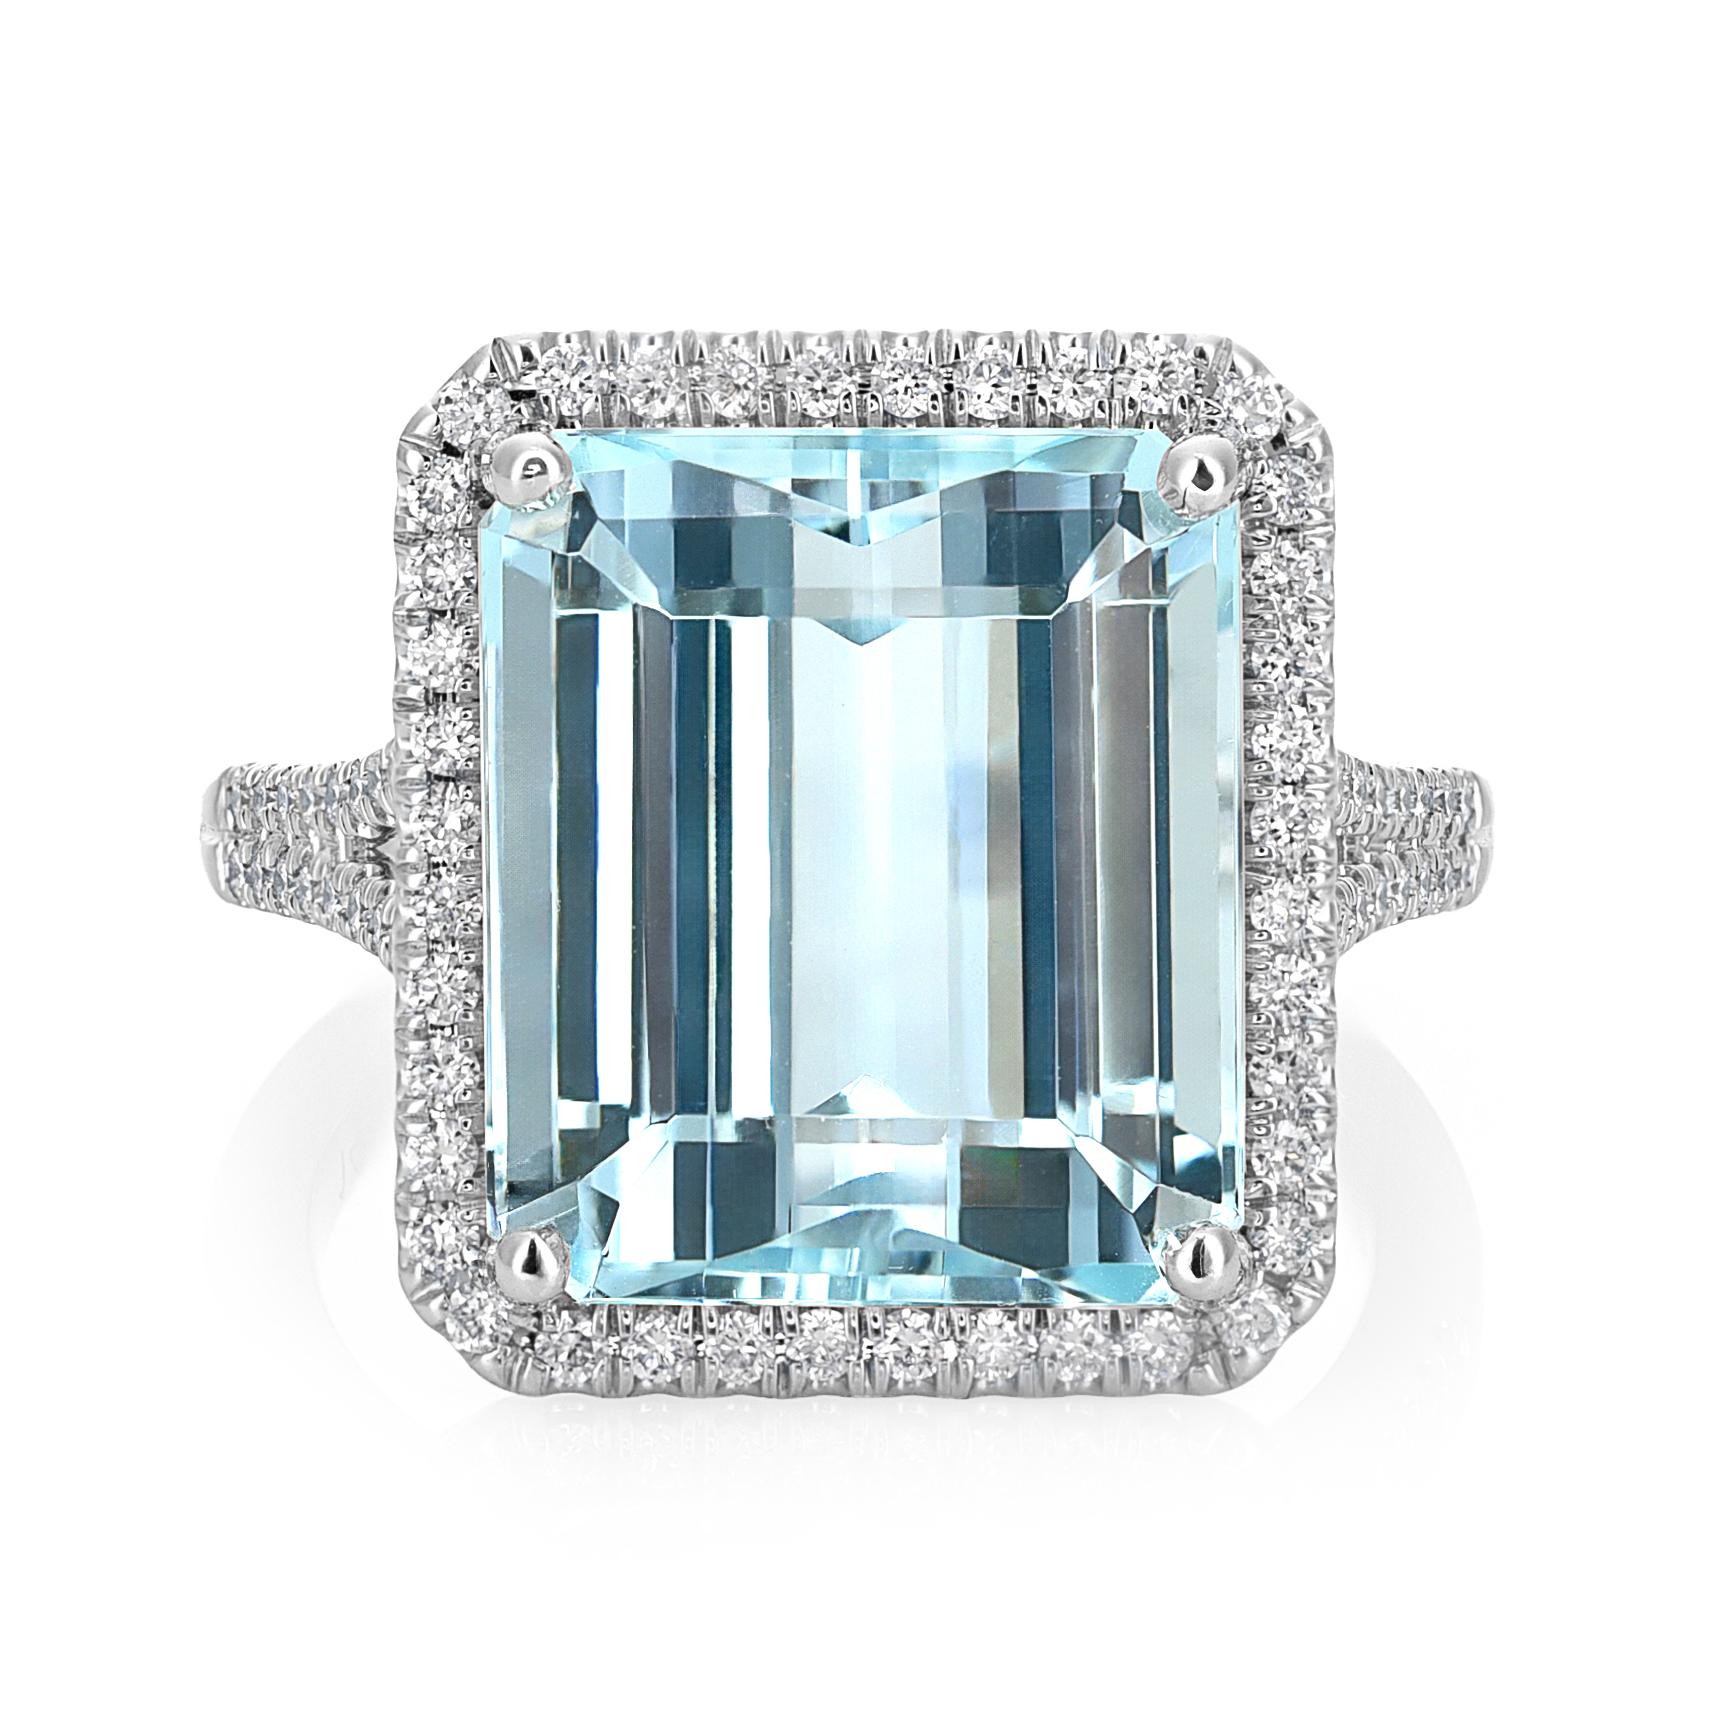 9.45 Carats Aquamarine Diamonds set in 14K White Gold Ring In New Condition For Sale In Los Angeles, CA